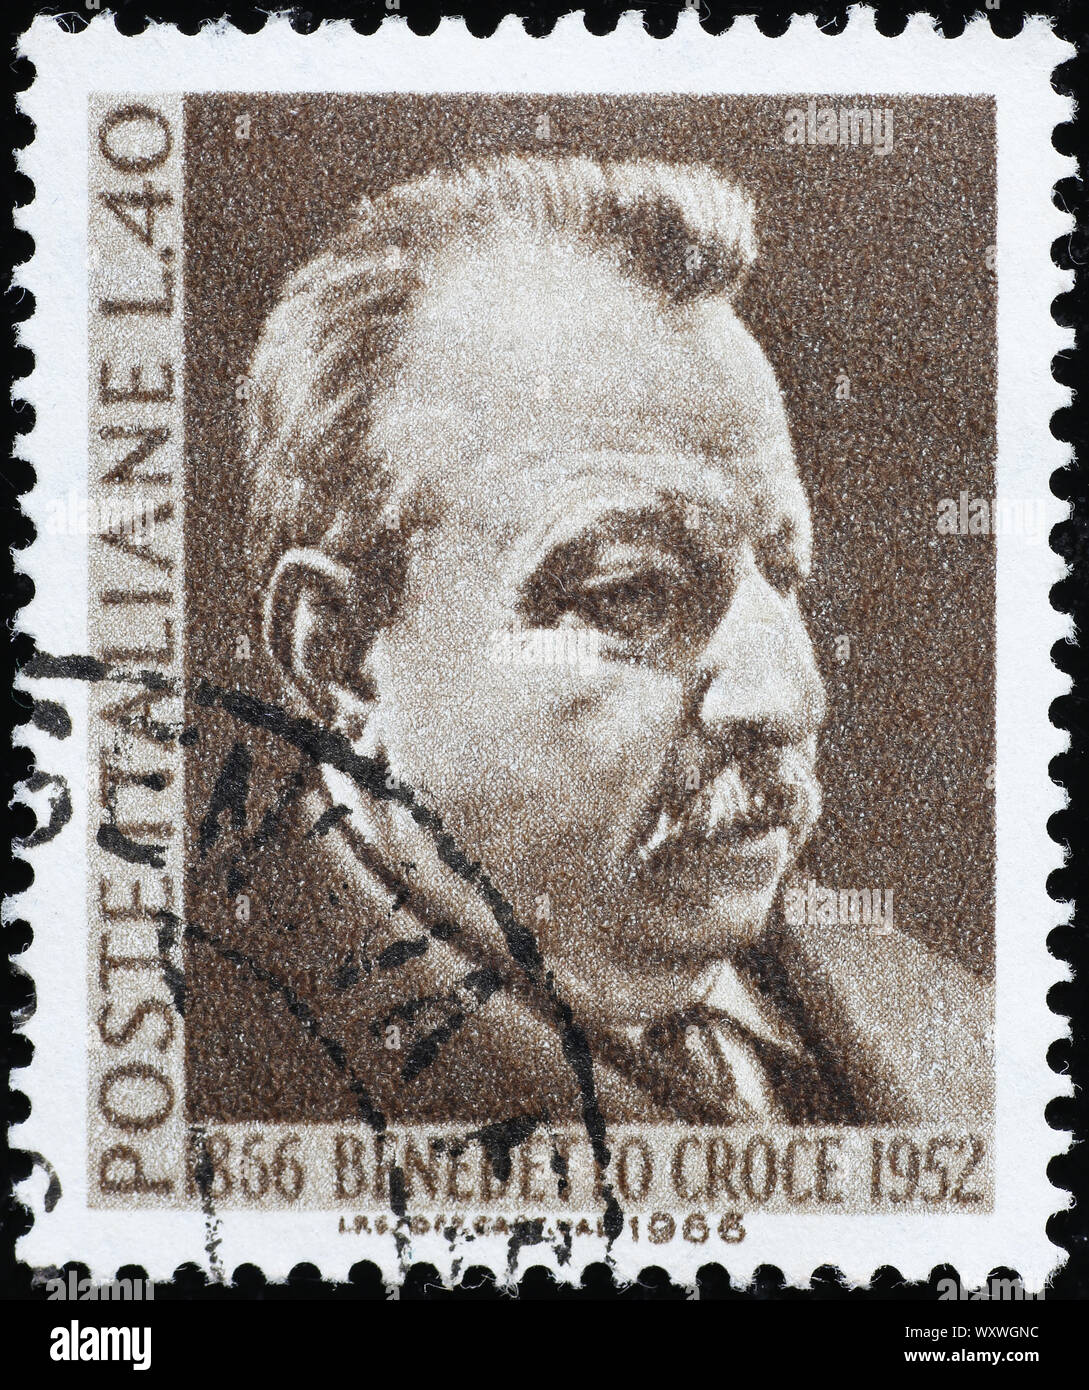 Italian philosopher Benedetto Croce on postage stamp Stock Photo